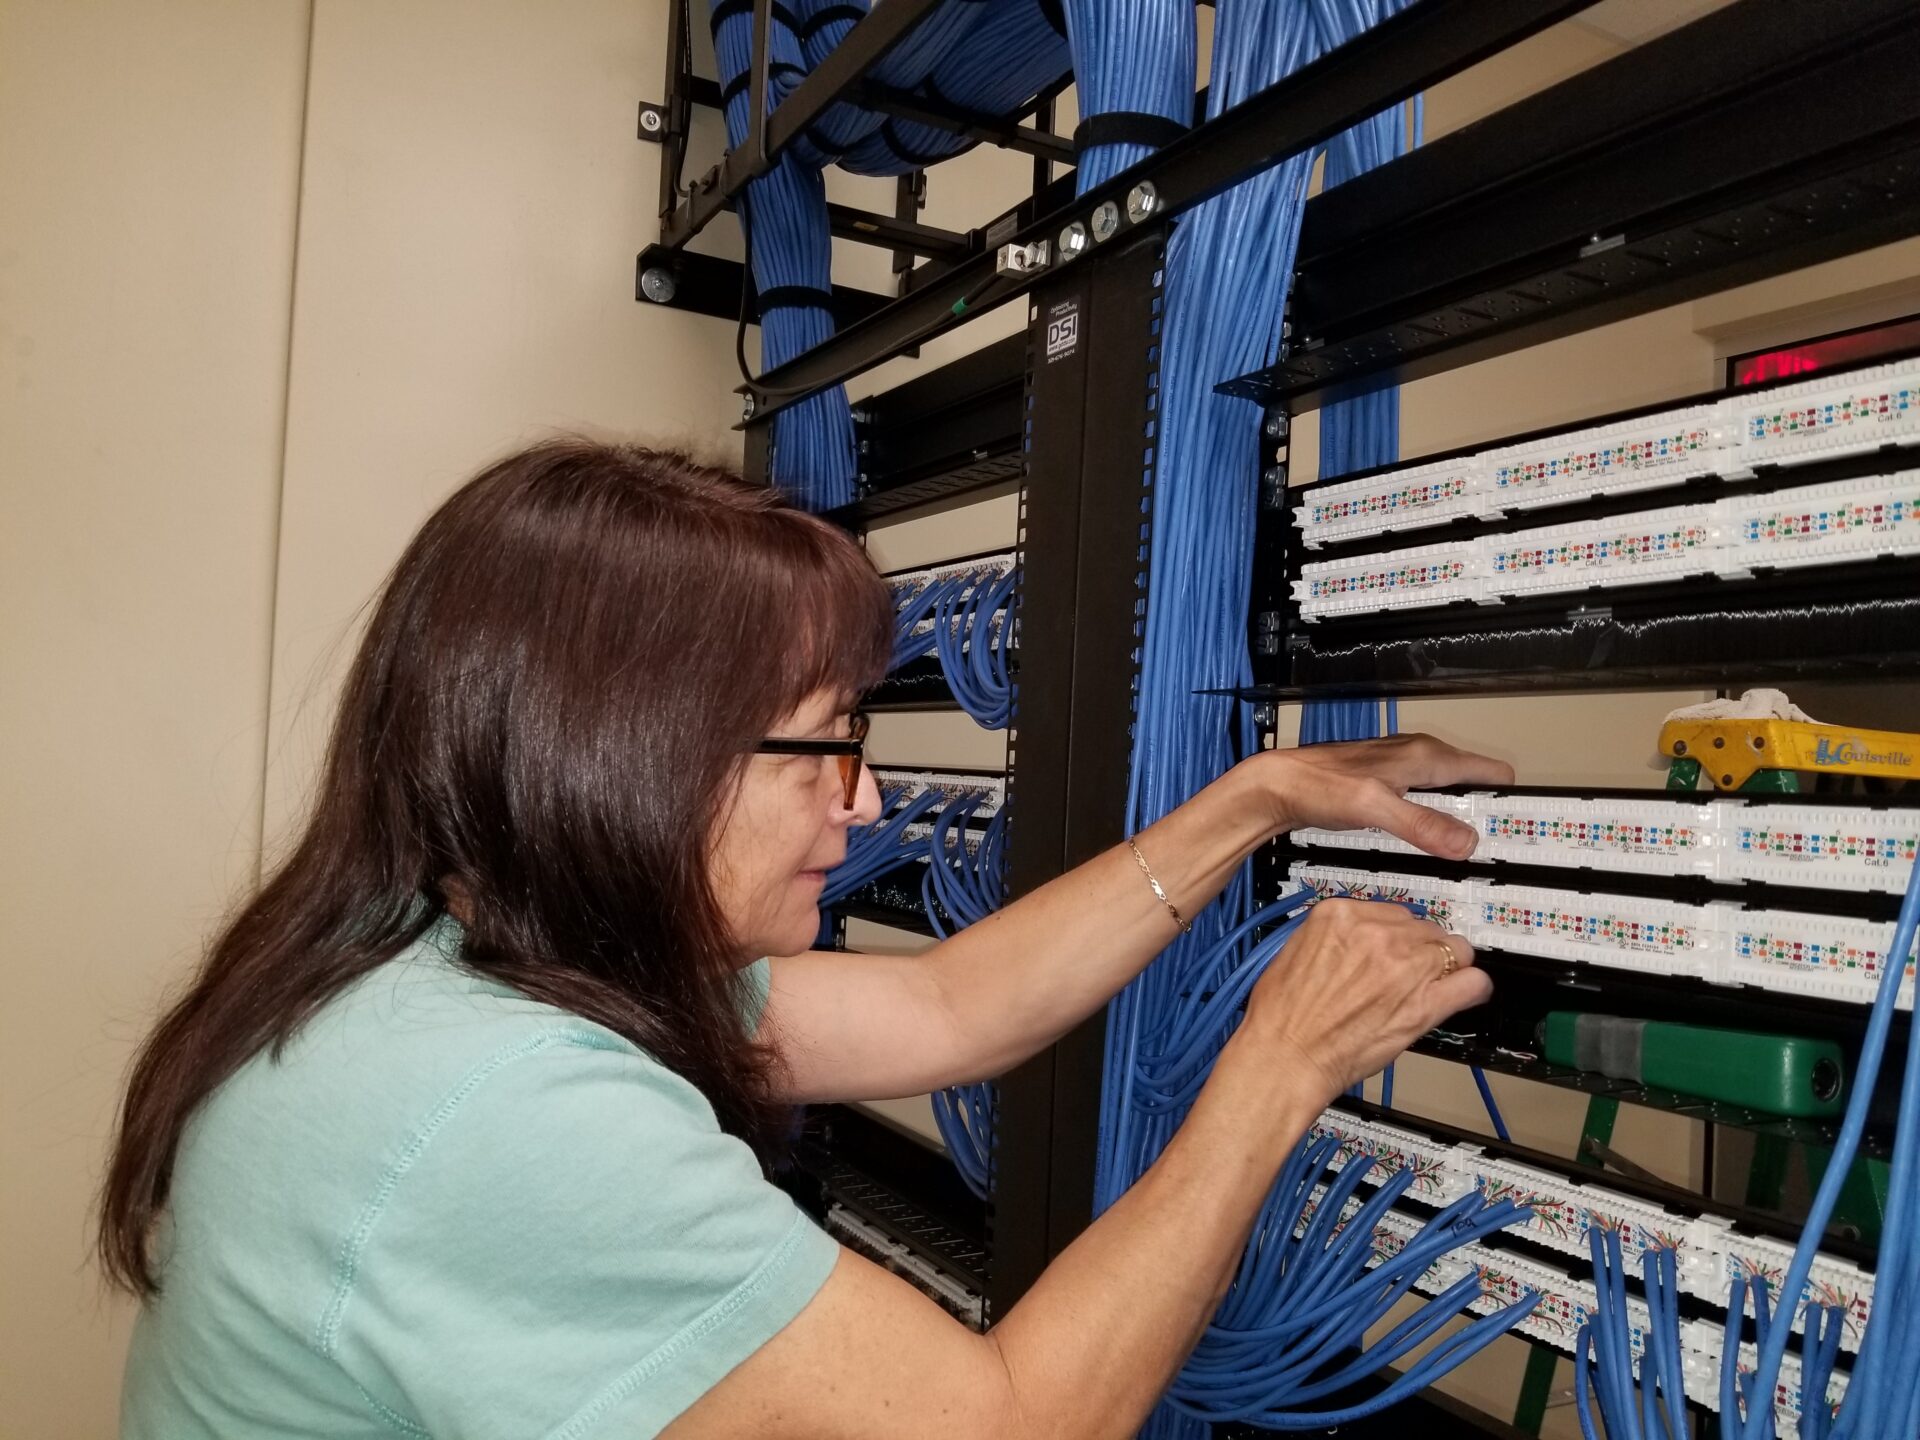 Network Cabling Contractor